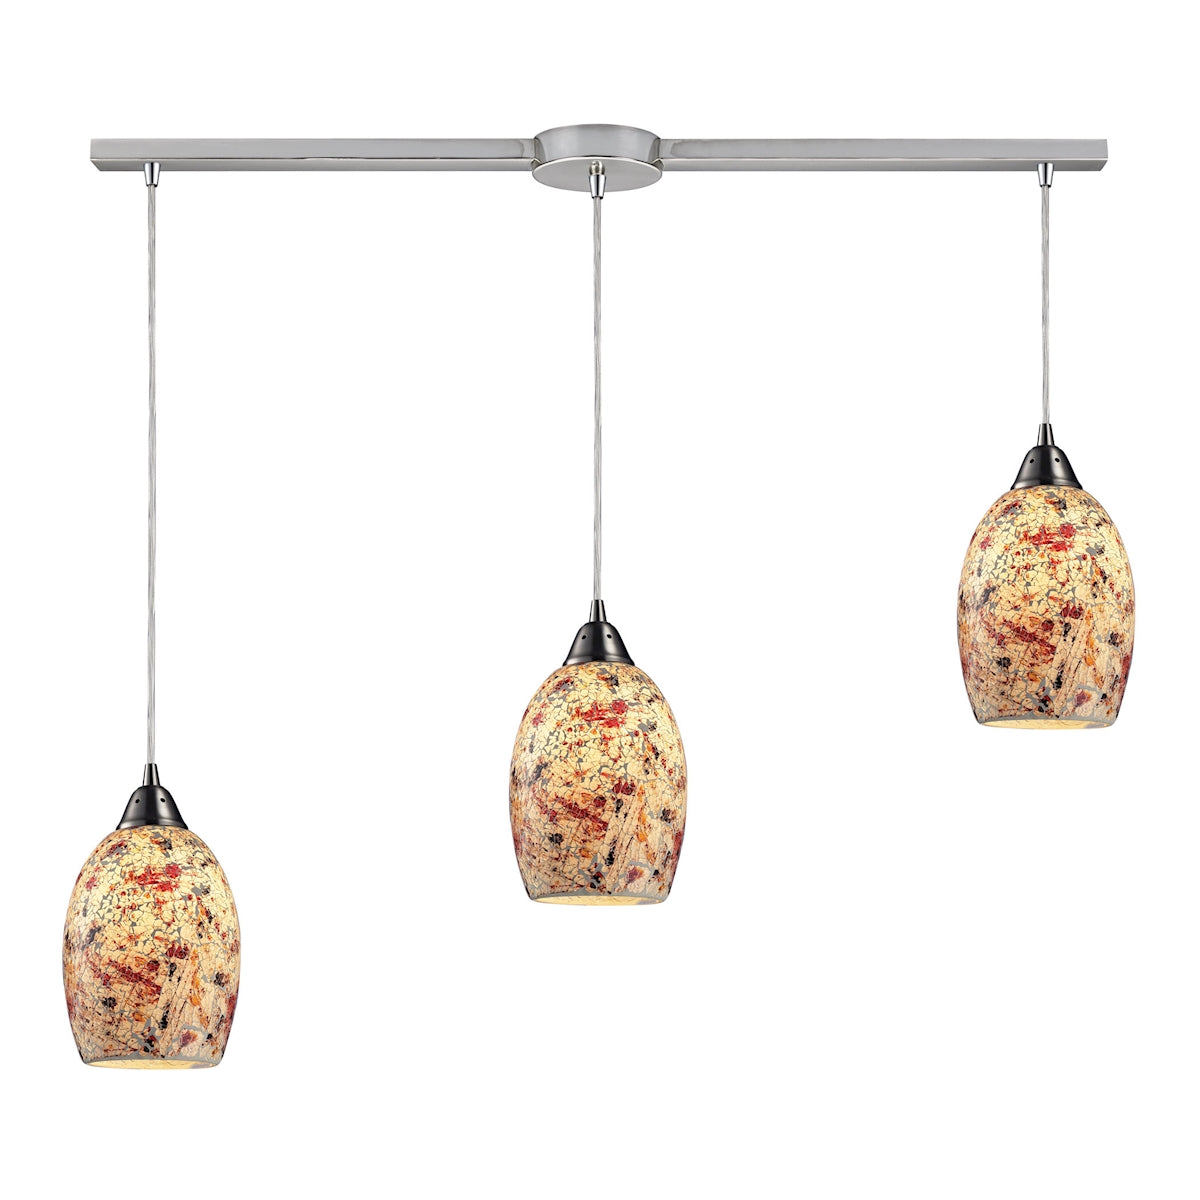 ELK Lighting 73011-3L Avalon 3-Light Linear Pendant Fixture in Satin Nickel with Multi-colored Crackle Glass